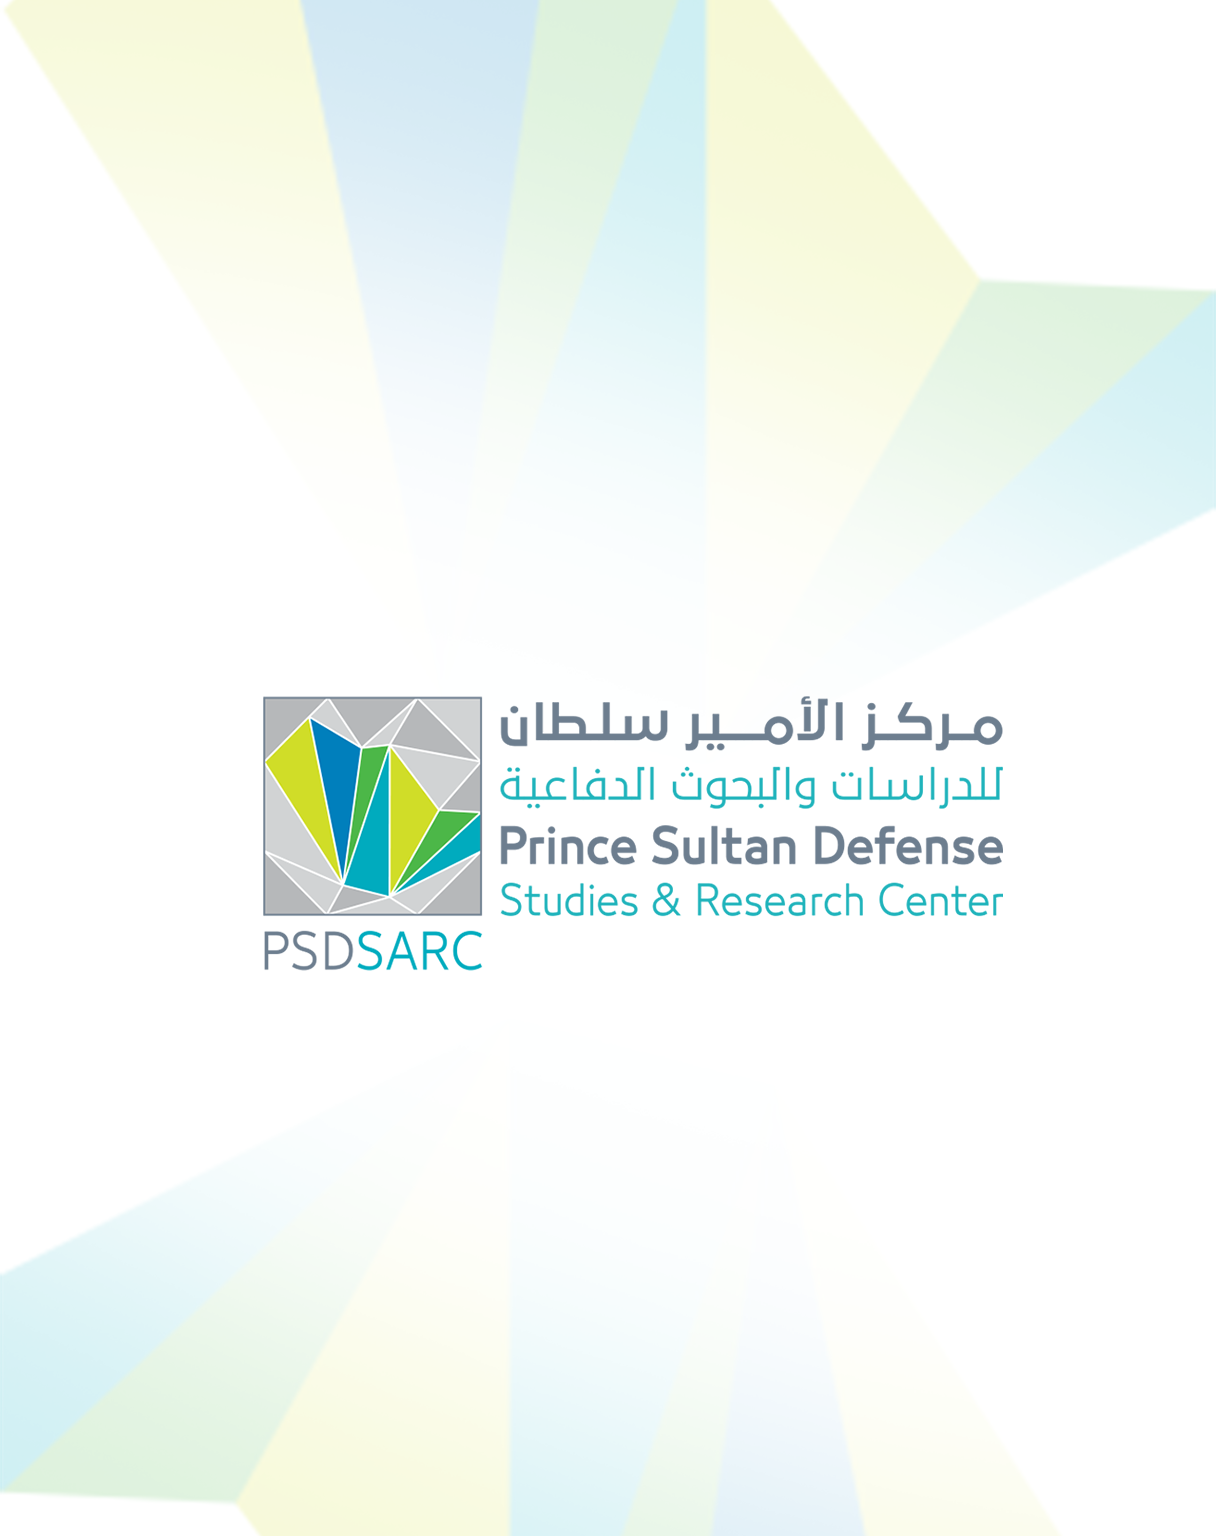 Cleaning services for the Prince Sultan Prince Sultan Defense Studies and Research Center and its facilities